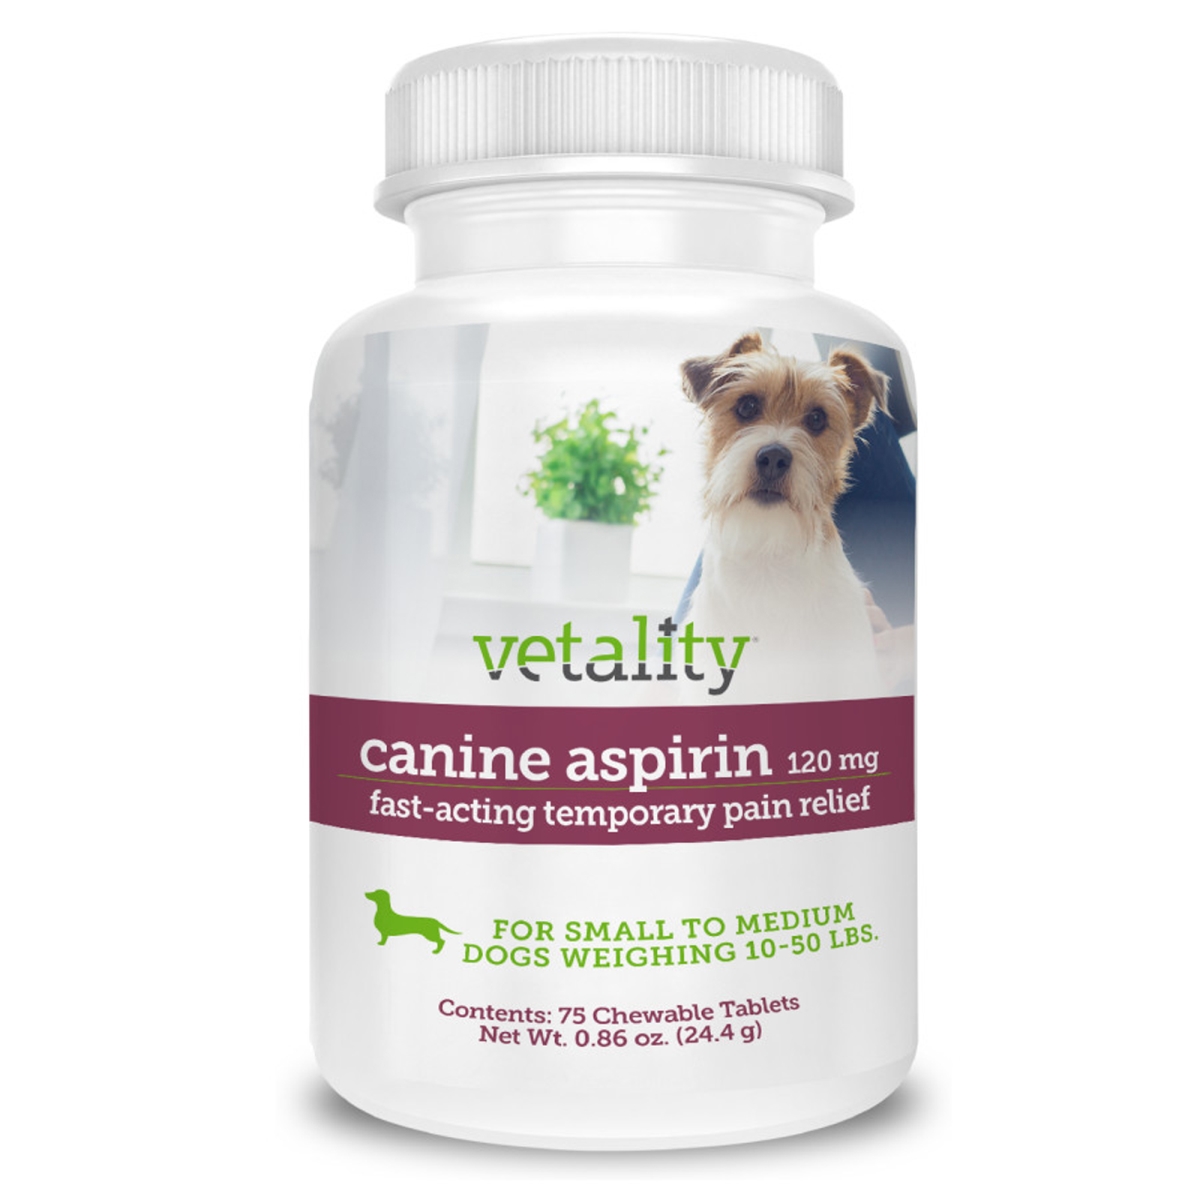 Tevra Brands 190623300622 120mg Vetality Canine Aspirin Chewable Tables - 75 Count